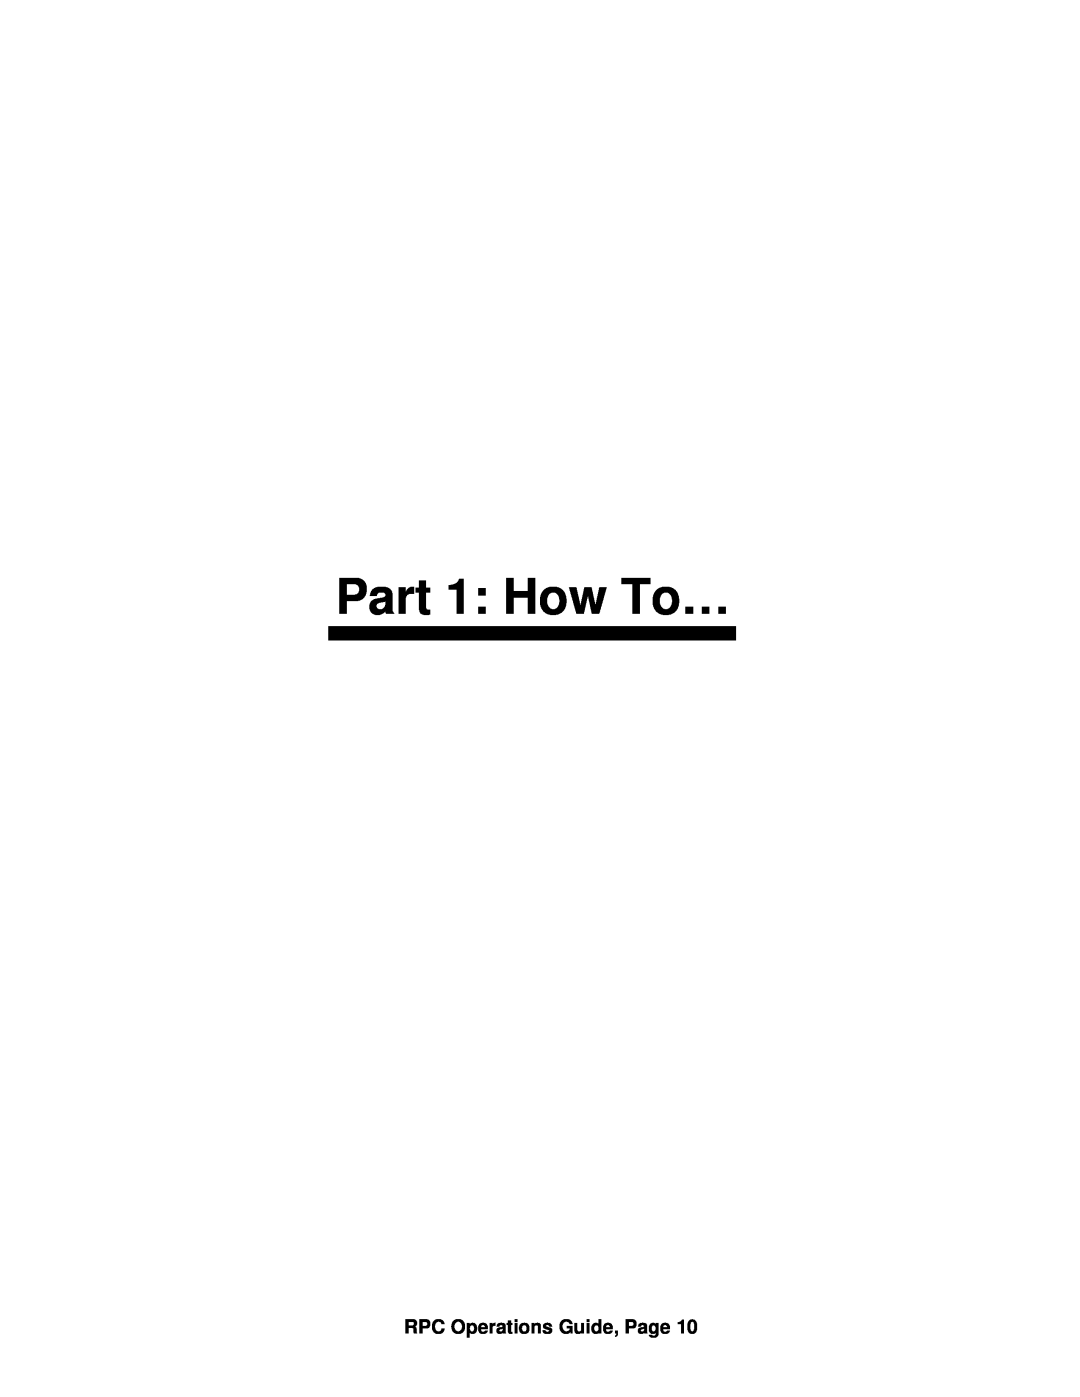 ARRI ARRI Ramp Preview Controller manual Part 1 How To…, RPC Operations Guide, Page 